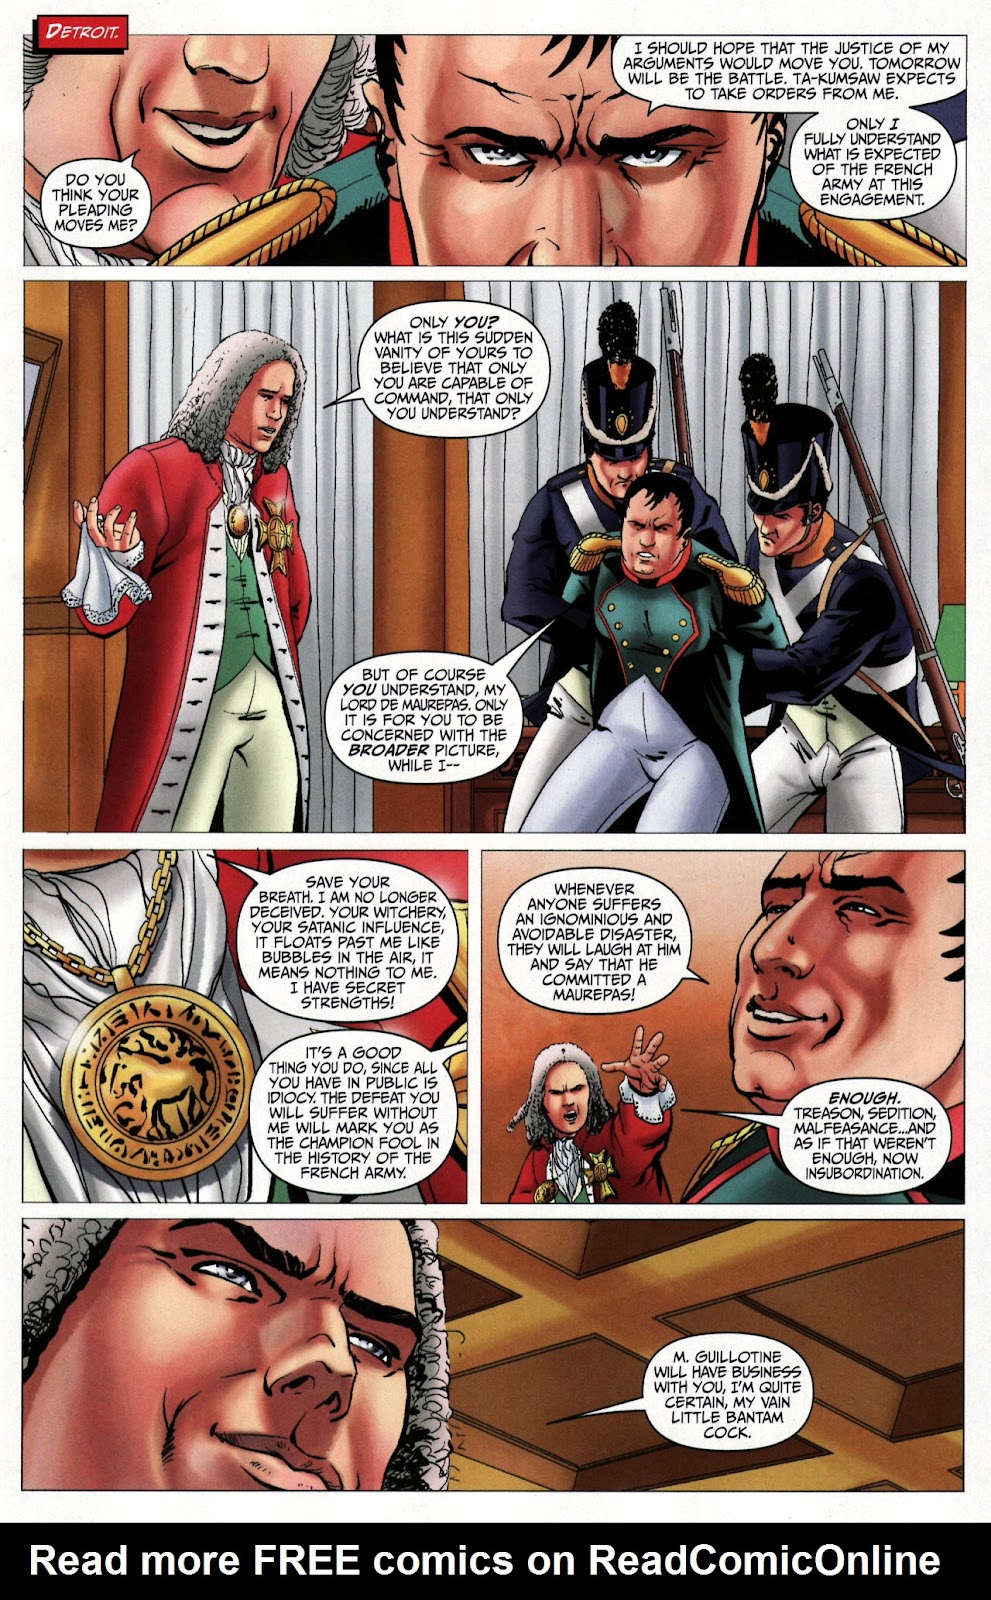 Red Prophet: The Tales of Alvin Maker issue 12 - Page 12